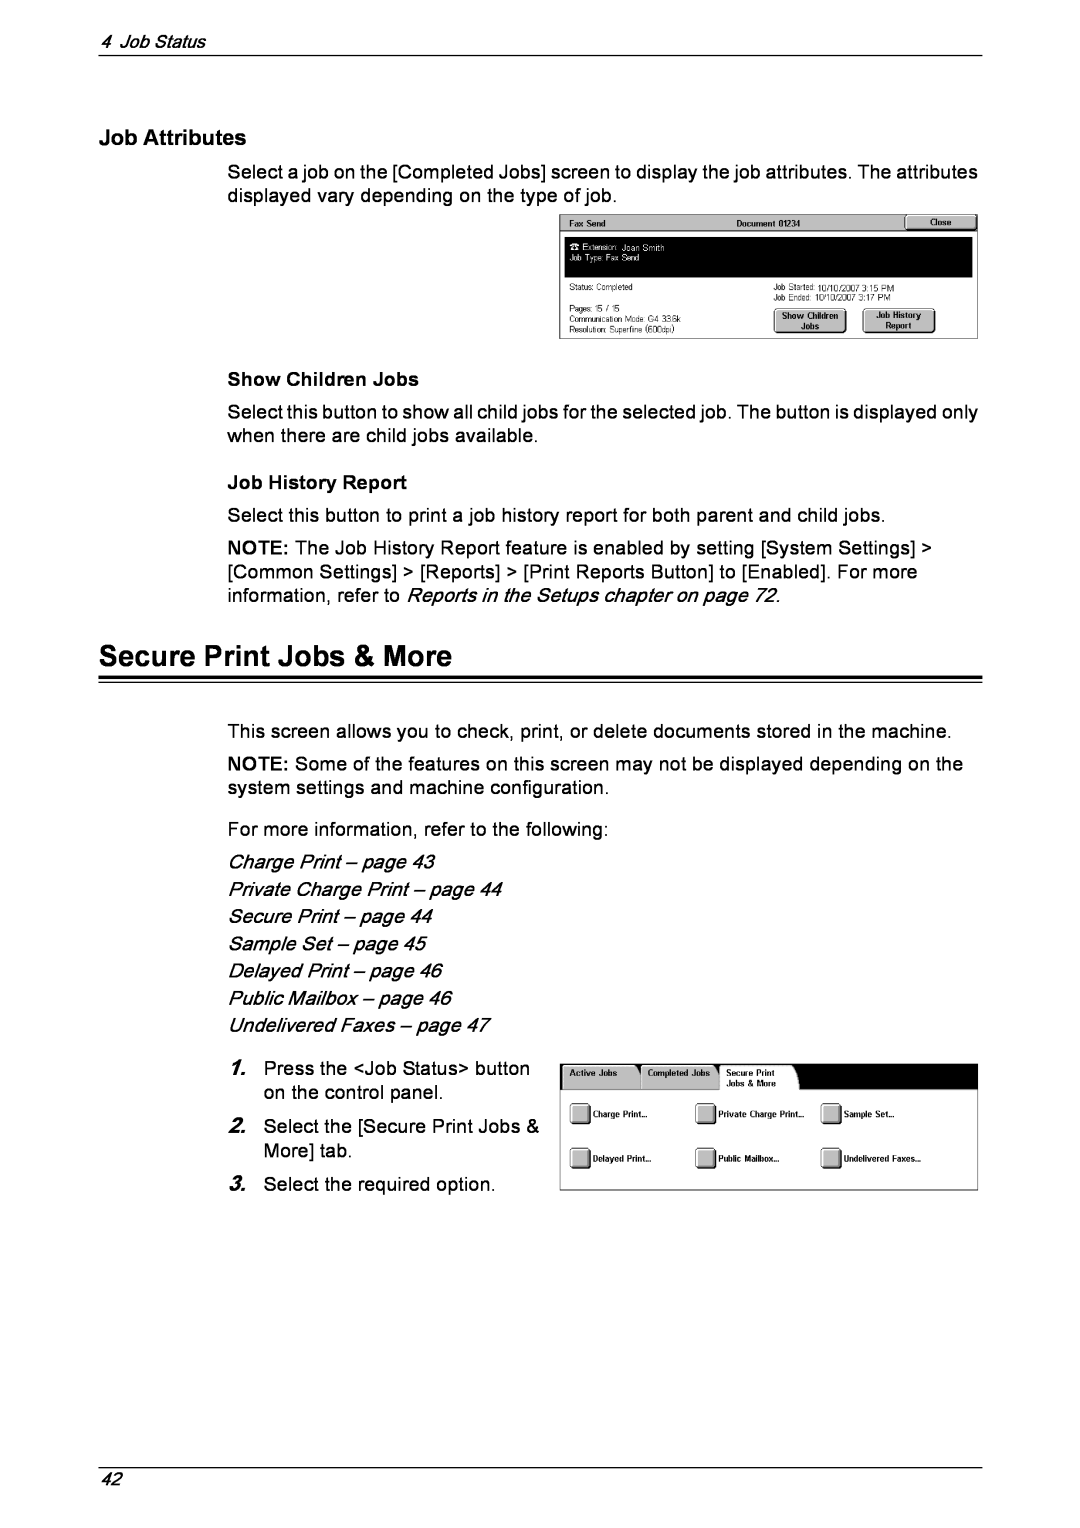 Xerox 5222 manual Secure Print Jobs & More, Show Children Jobs, Job History Report, Secure Print – page Sample Set – page 